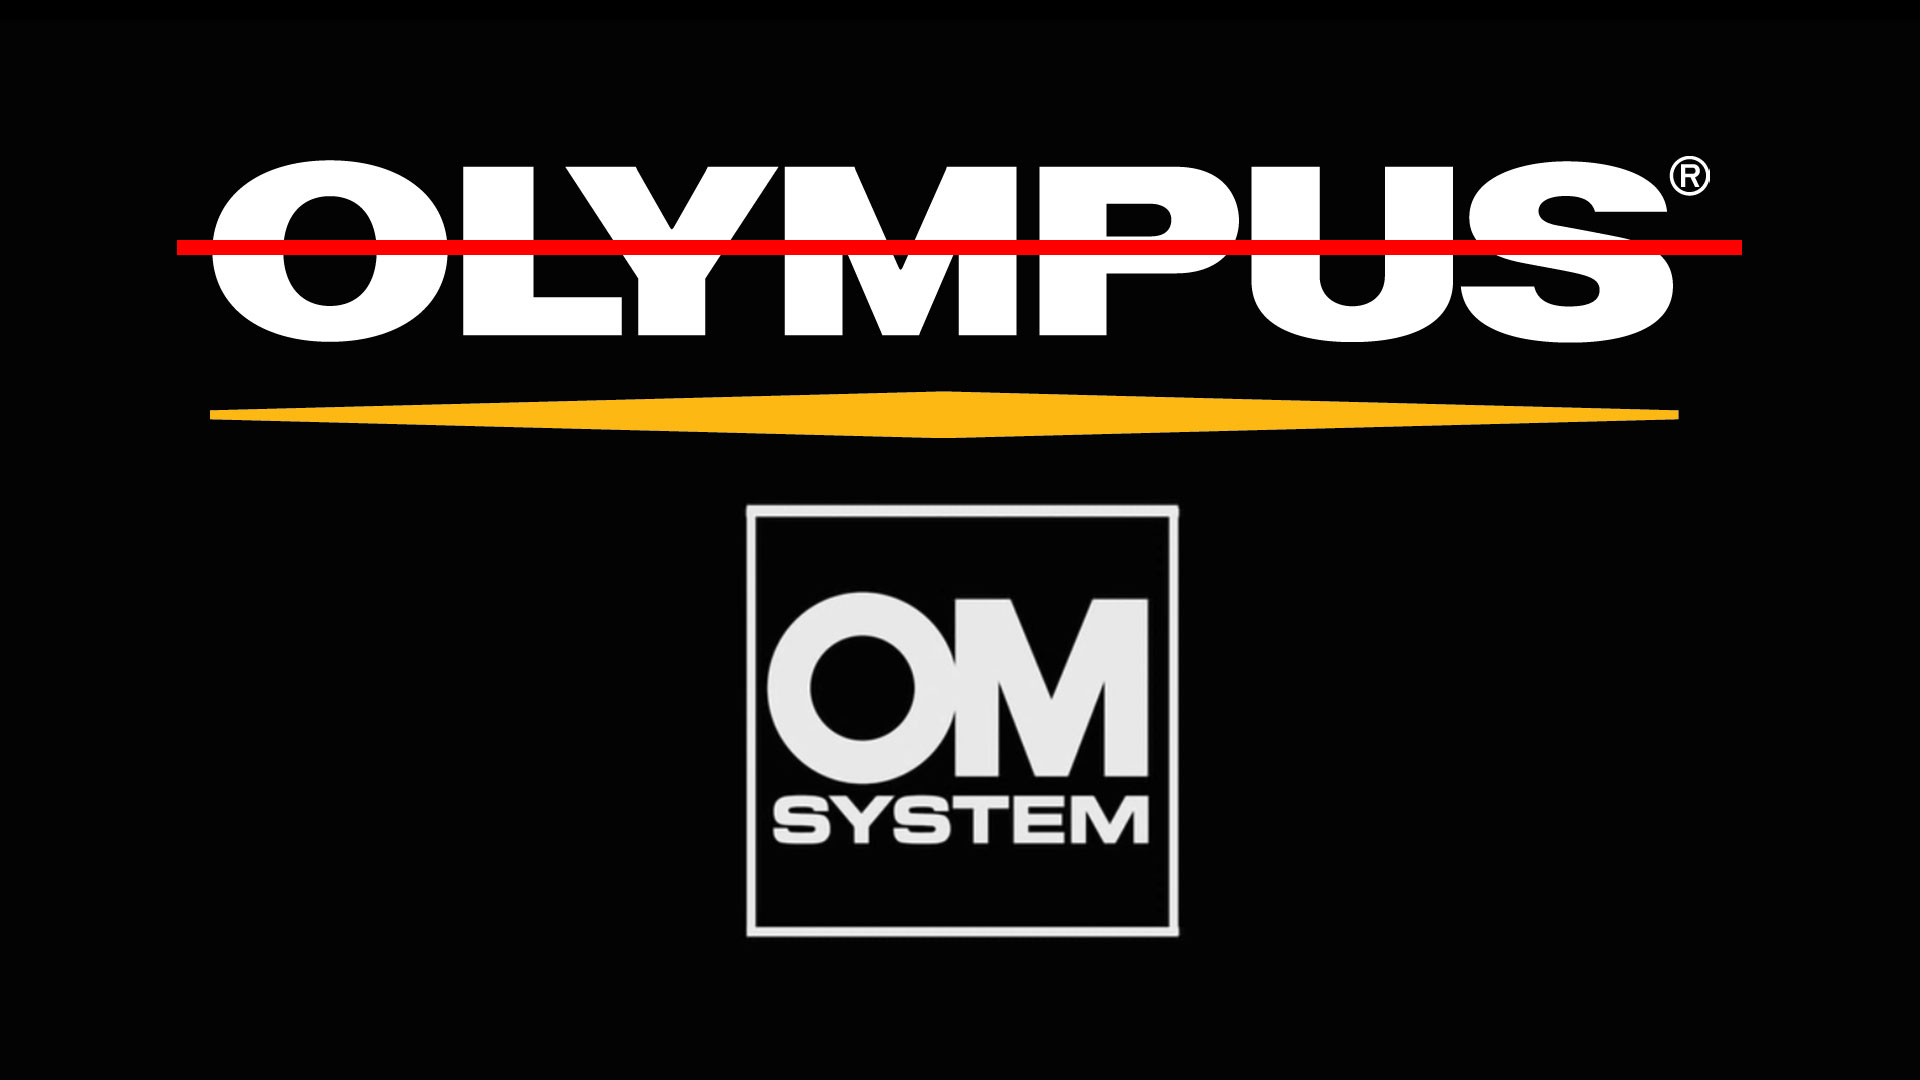 The Brand Olympus has Fallen - Welcome, OM System